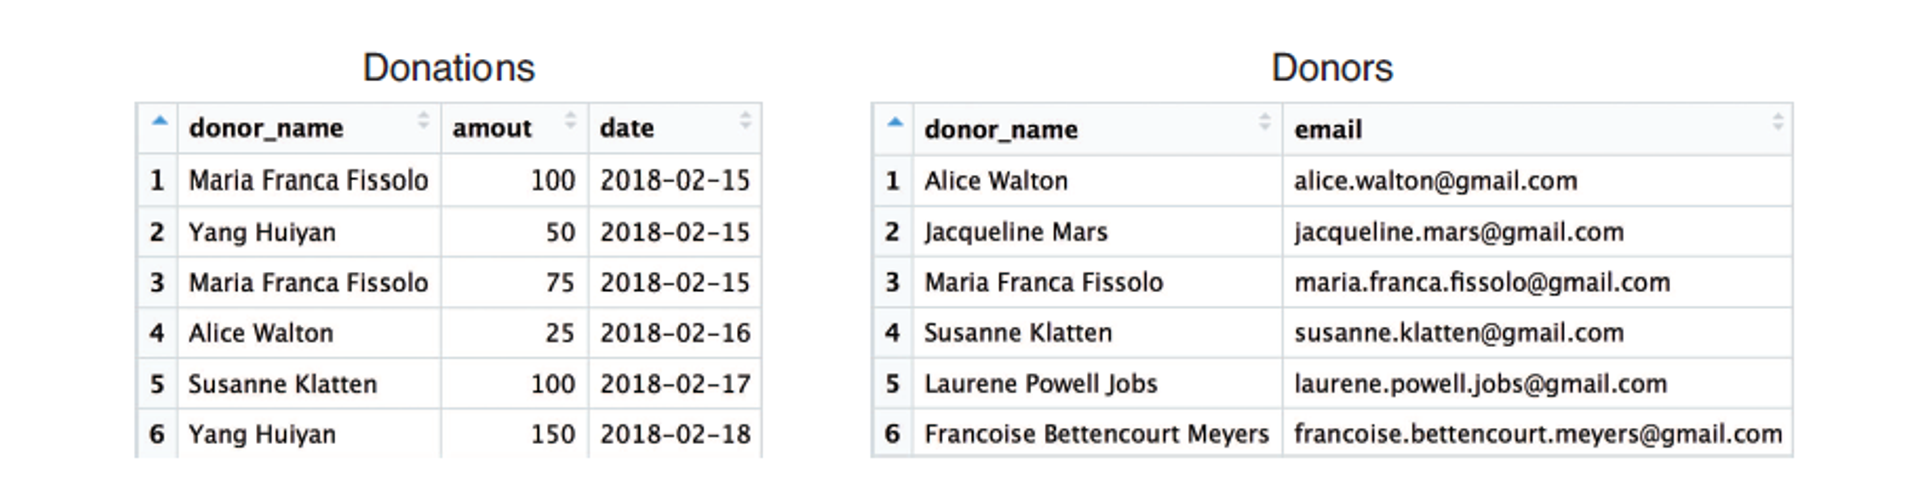 An example data frame of donations (left) and donor information (right)